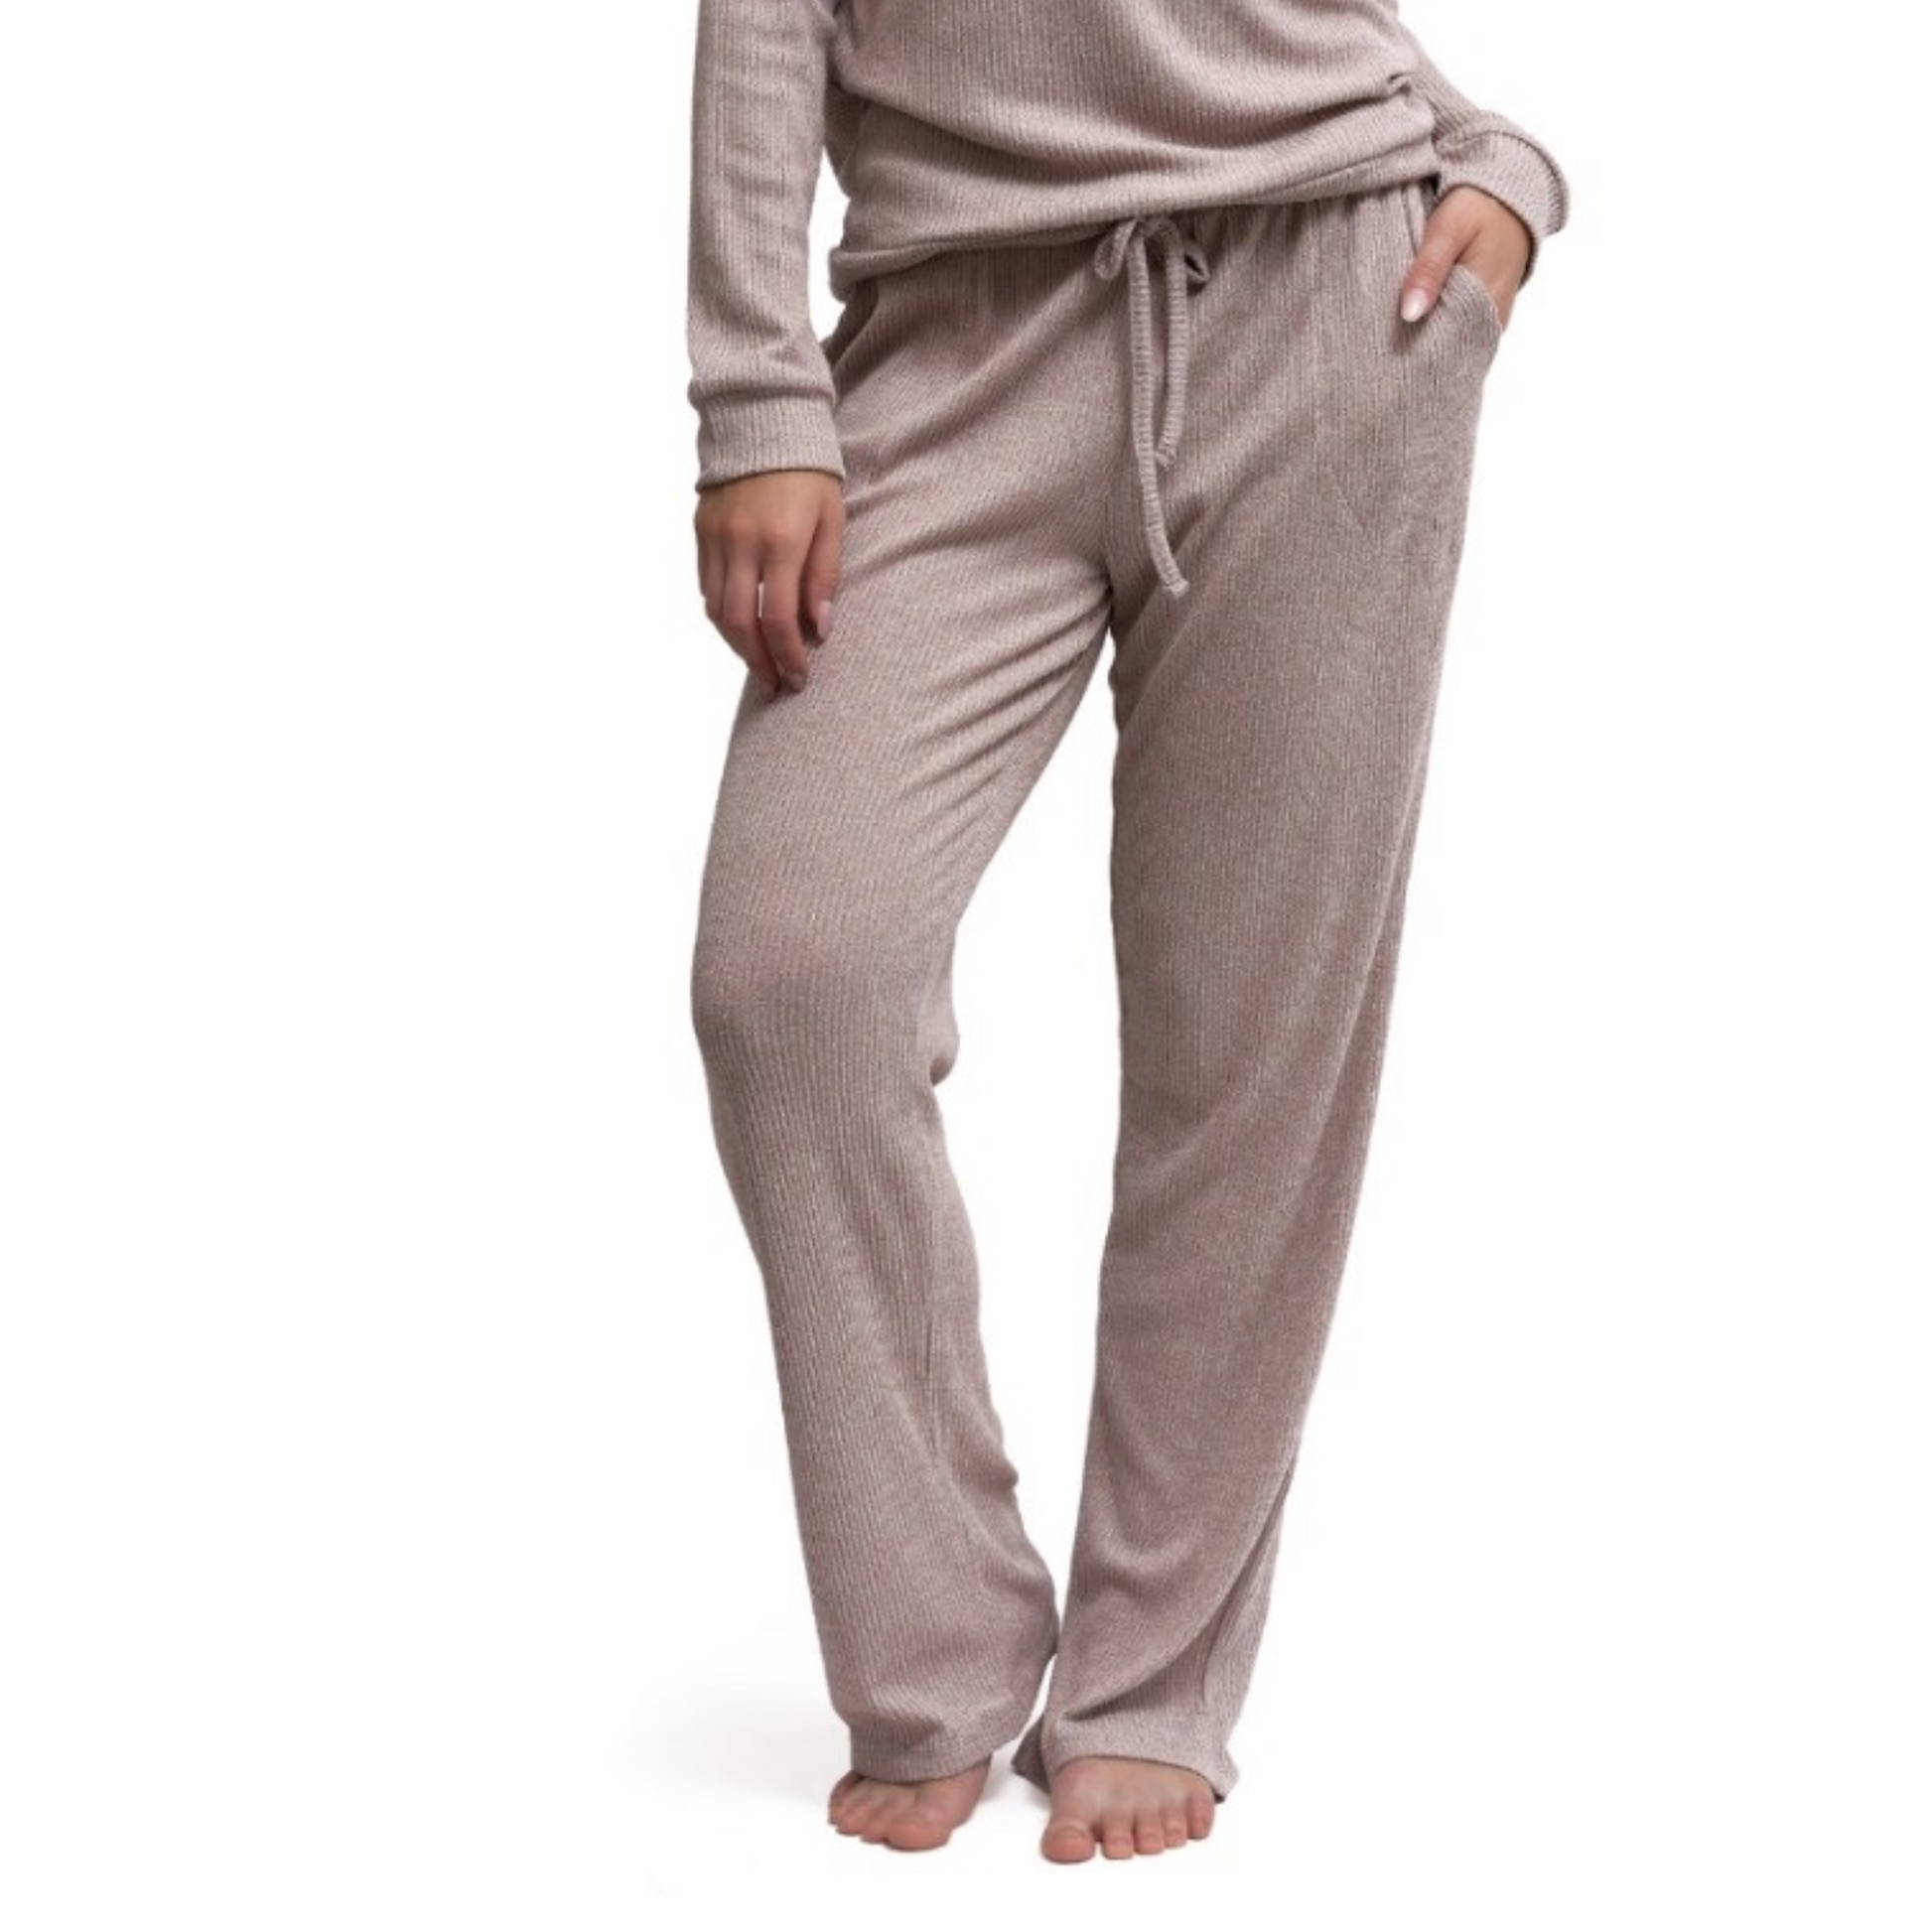 Our Cuddle Blend Lounge Pants are designed with both comfort and style in mind. These pants are crafted with a dreamy, soft fabric and available in pink and grey. The Cuddle Blend Lounge Pants can be paired with matching cardigans and tanks.